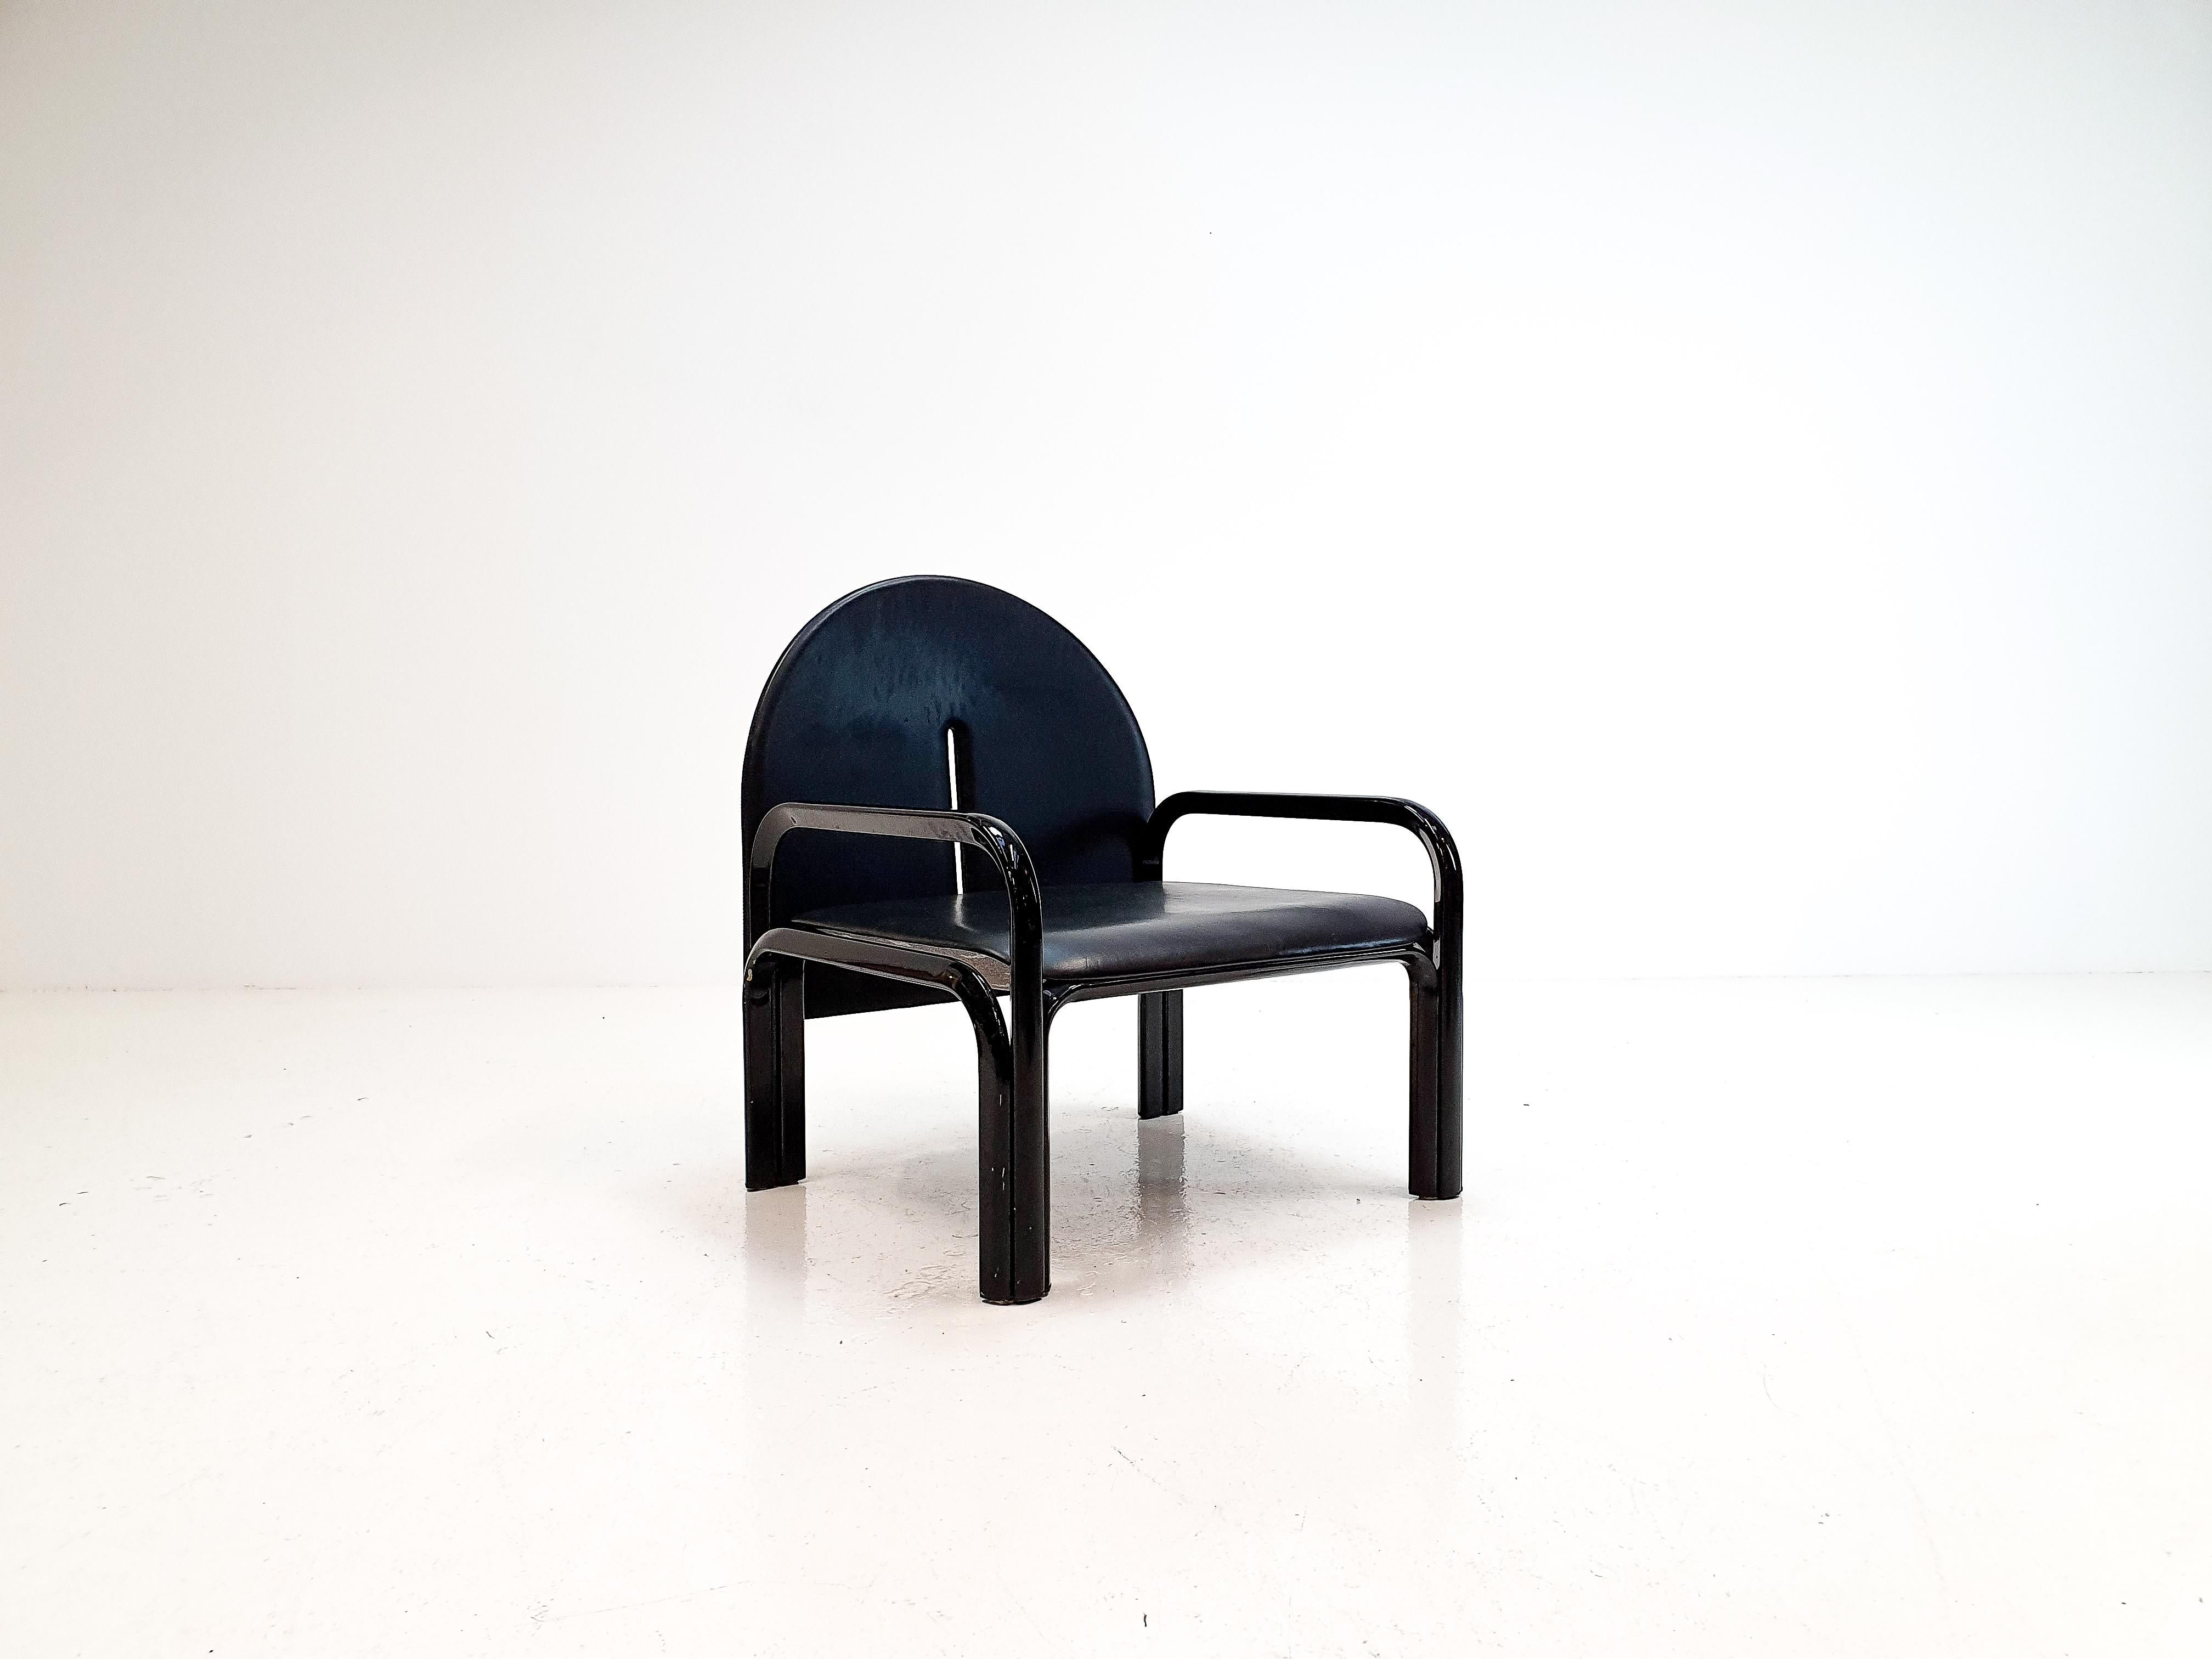 A hard to source tubular steel Model '54 L' armchair by Gae Aulenti.

Designed in 1976 and produced by Knoll International with black frame and black seat and backrest.

Dimensions:
Height 77 cm / 30.15 inches
Depth 69.5 cm / 27.36